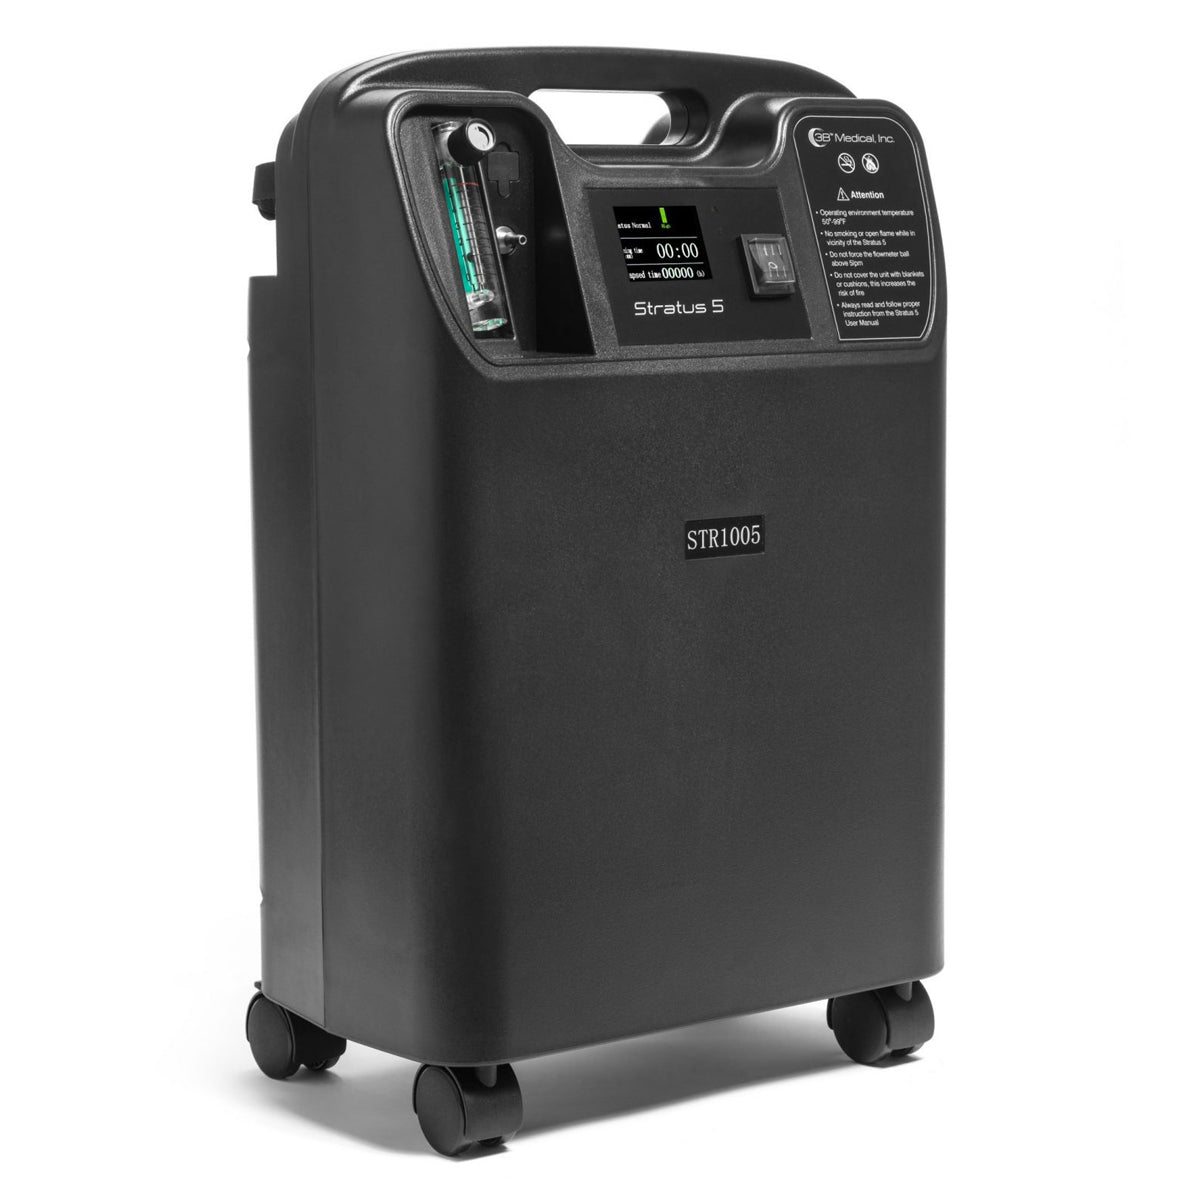 Stratus 5 Home Oxygen Concentrator Package (5 LPM) - CERTIFIED PRE-OWNED